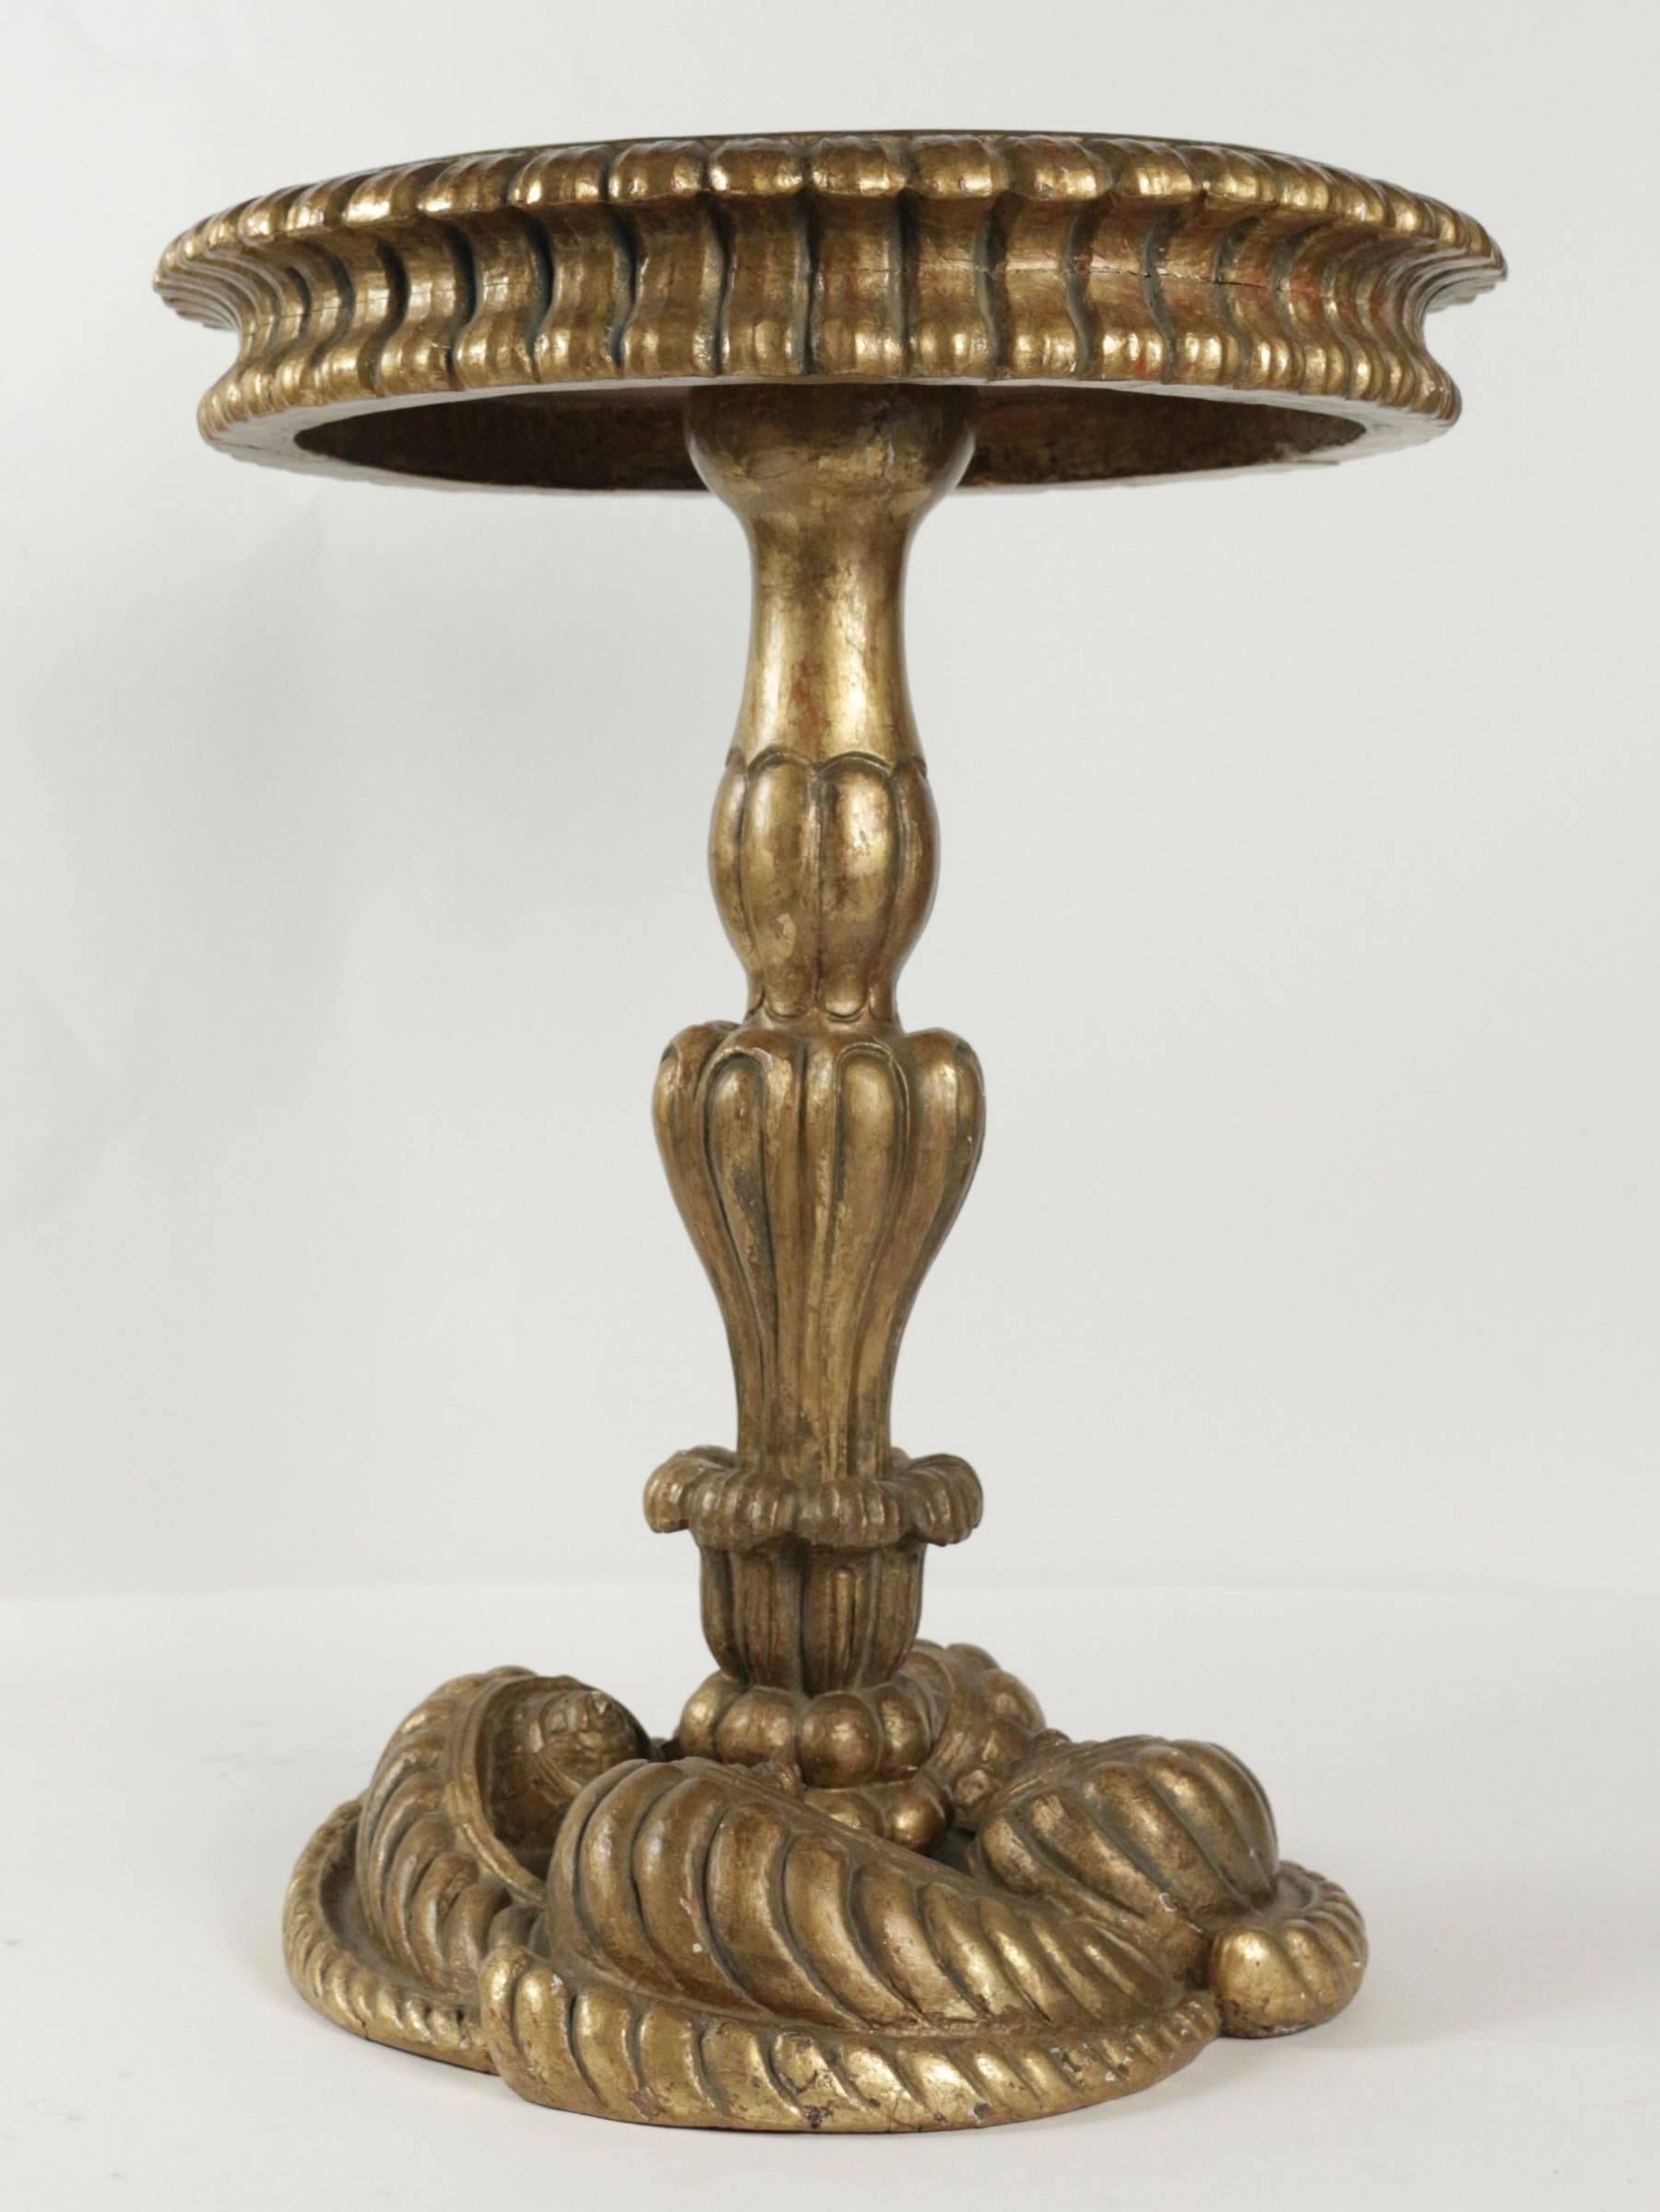 Side table of the early 19th century, base decorated with carved and gilded wooden shells. 
Measures: H 61cm, D 47cm.